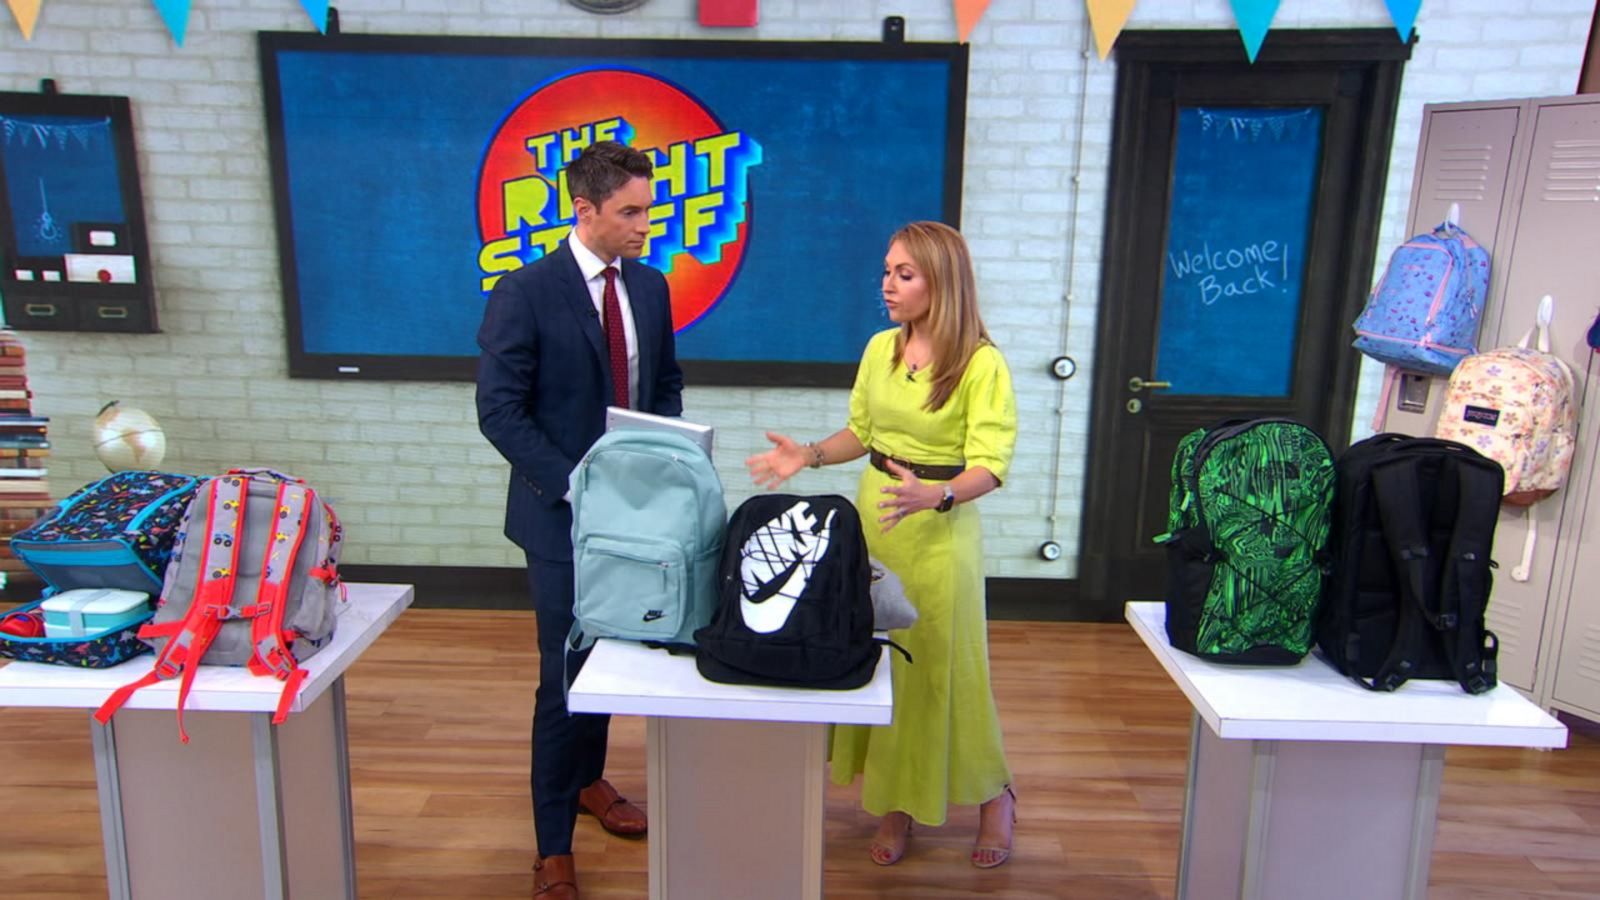 VIDEO: The best backpacks for back-to-school season